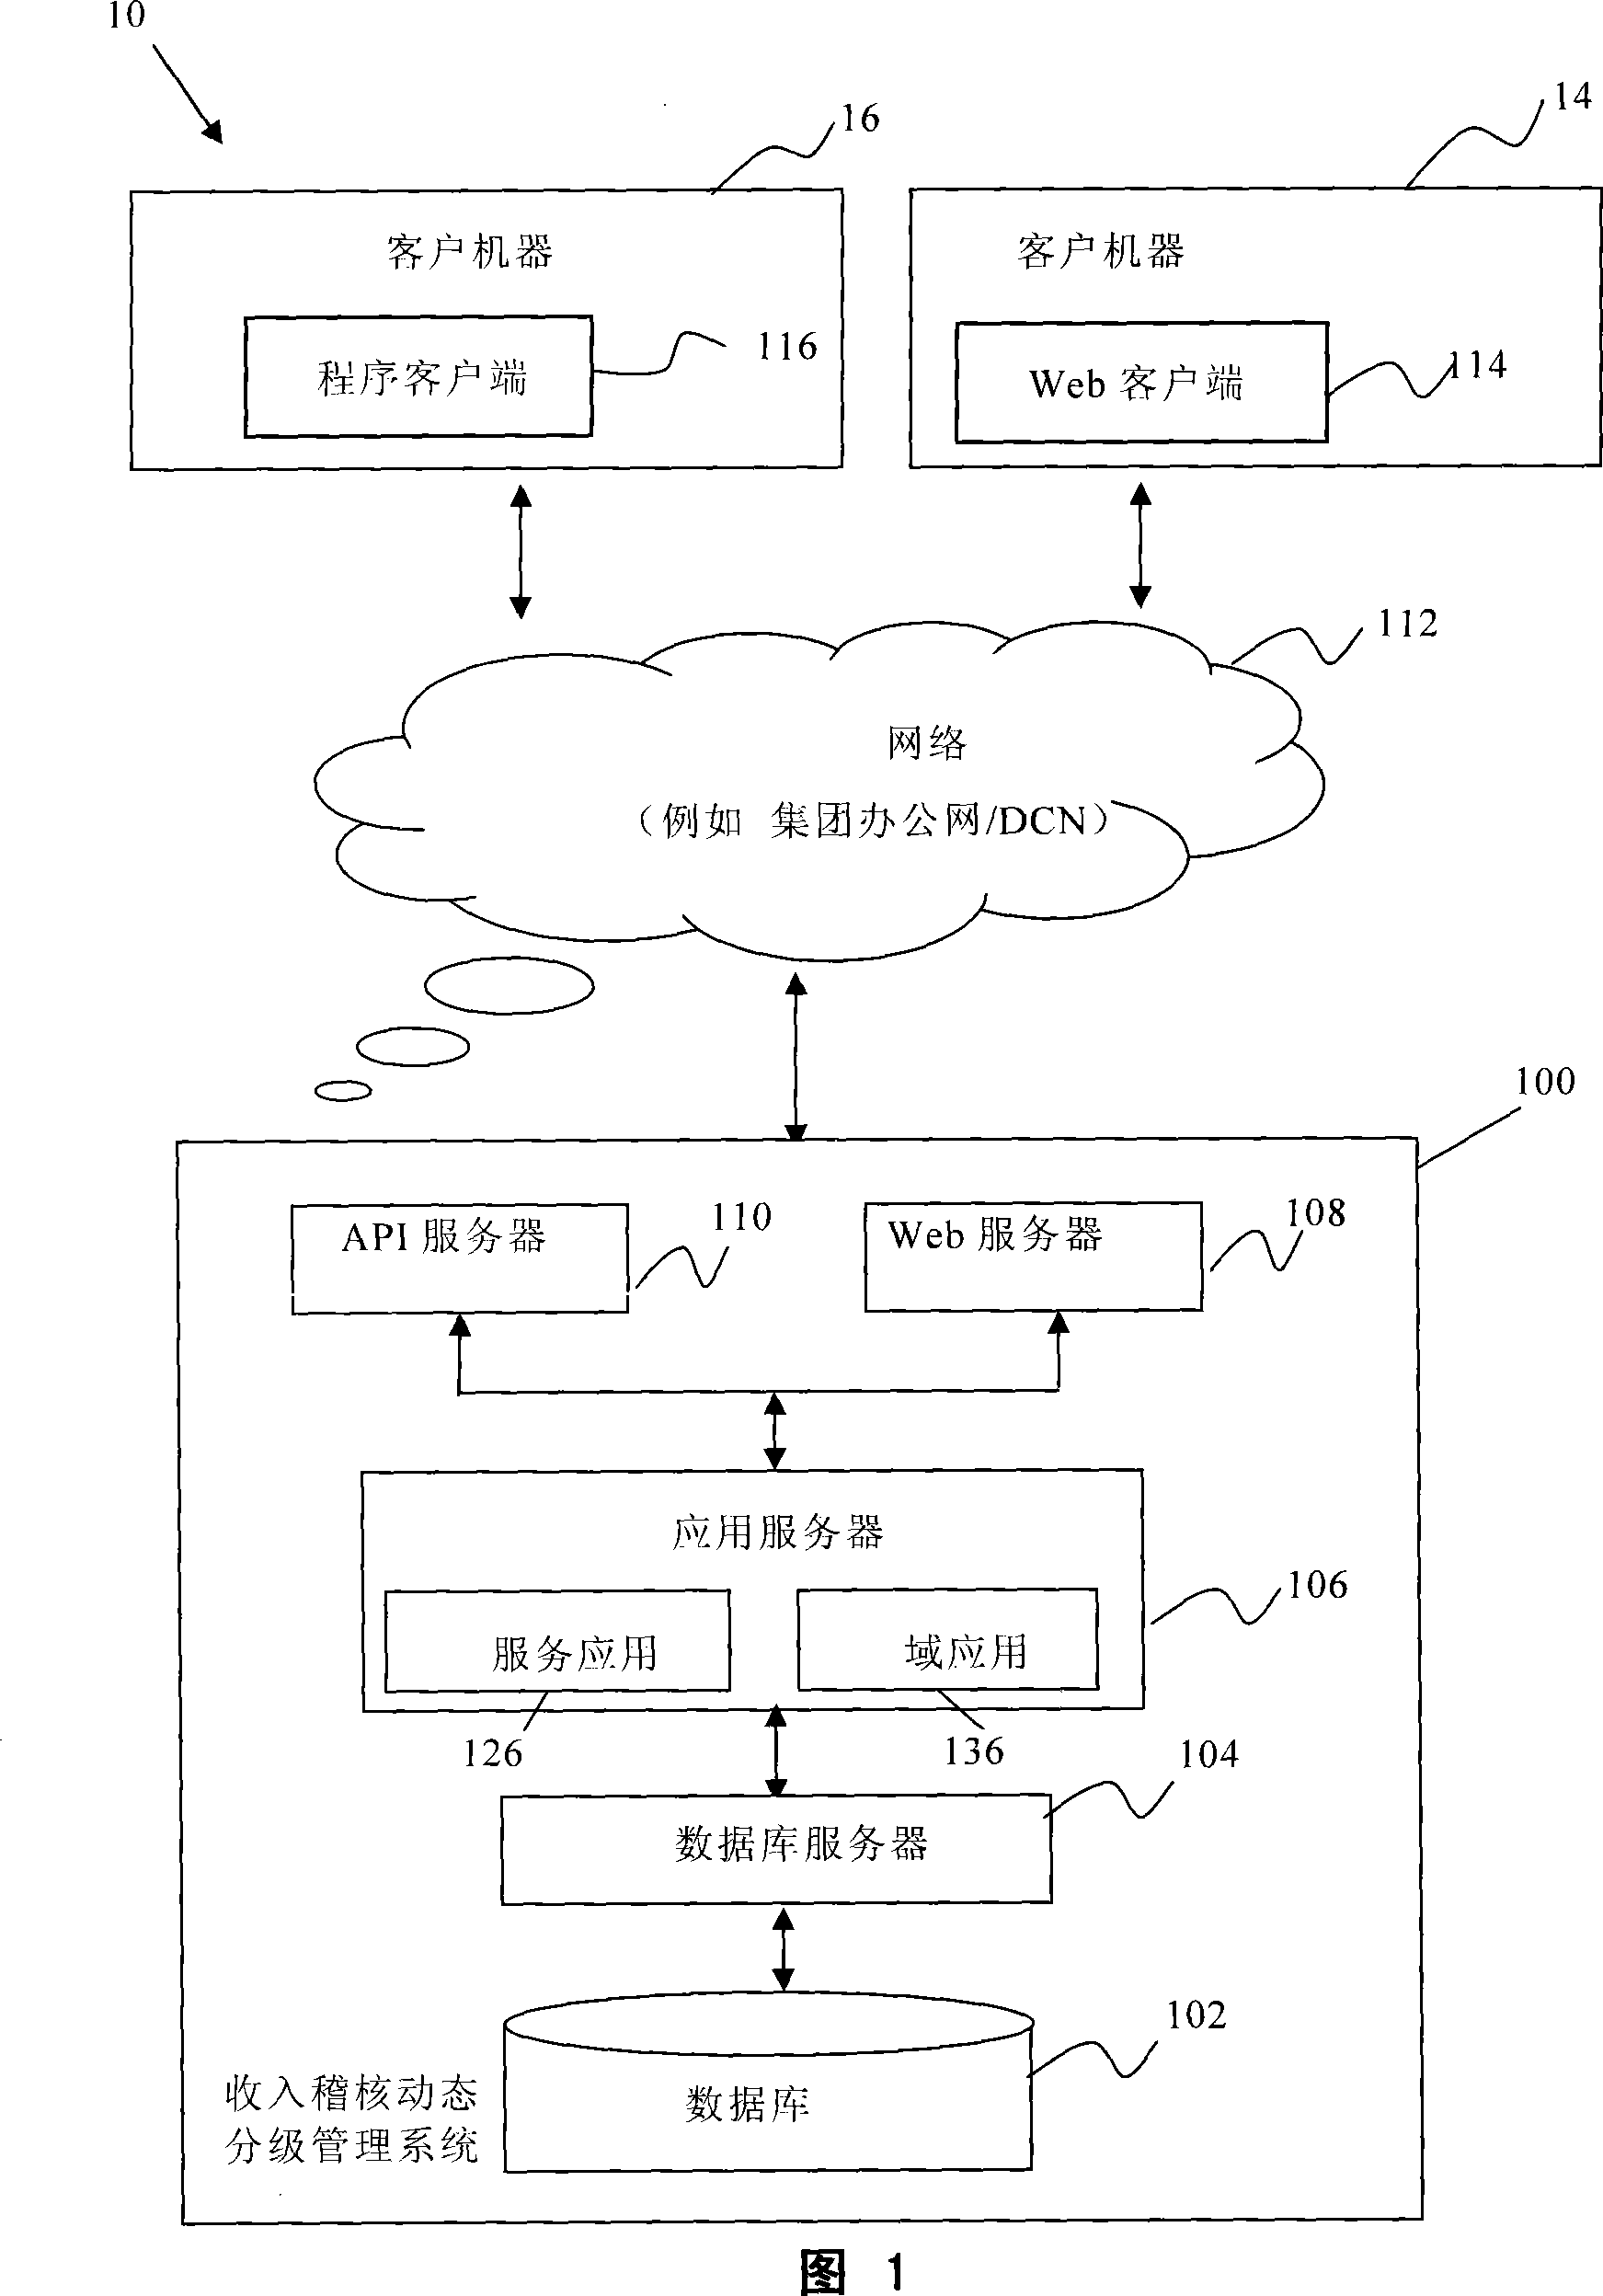 Telecommunication income check dynamic hierarchical management system and method